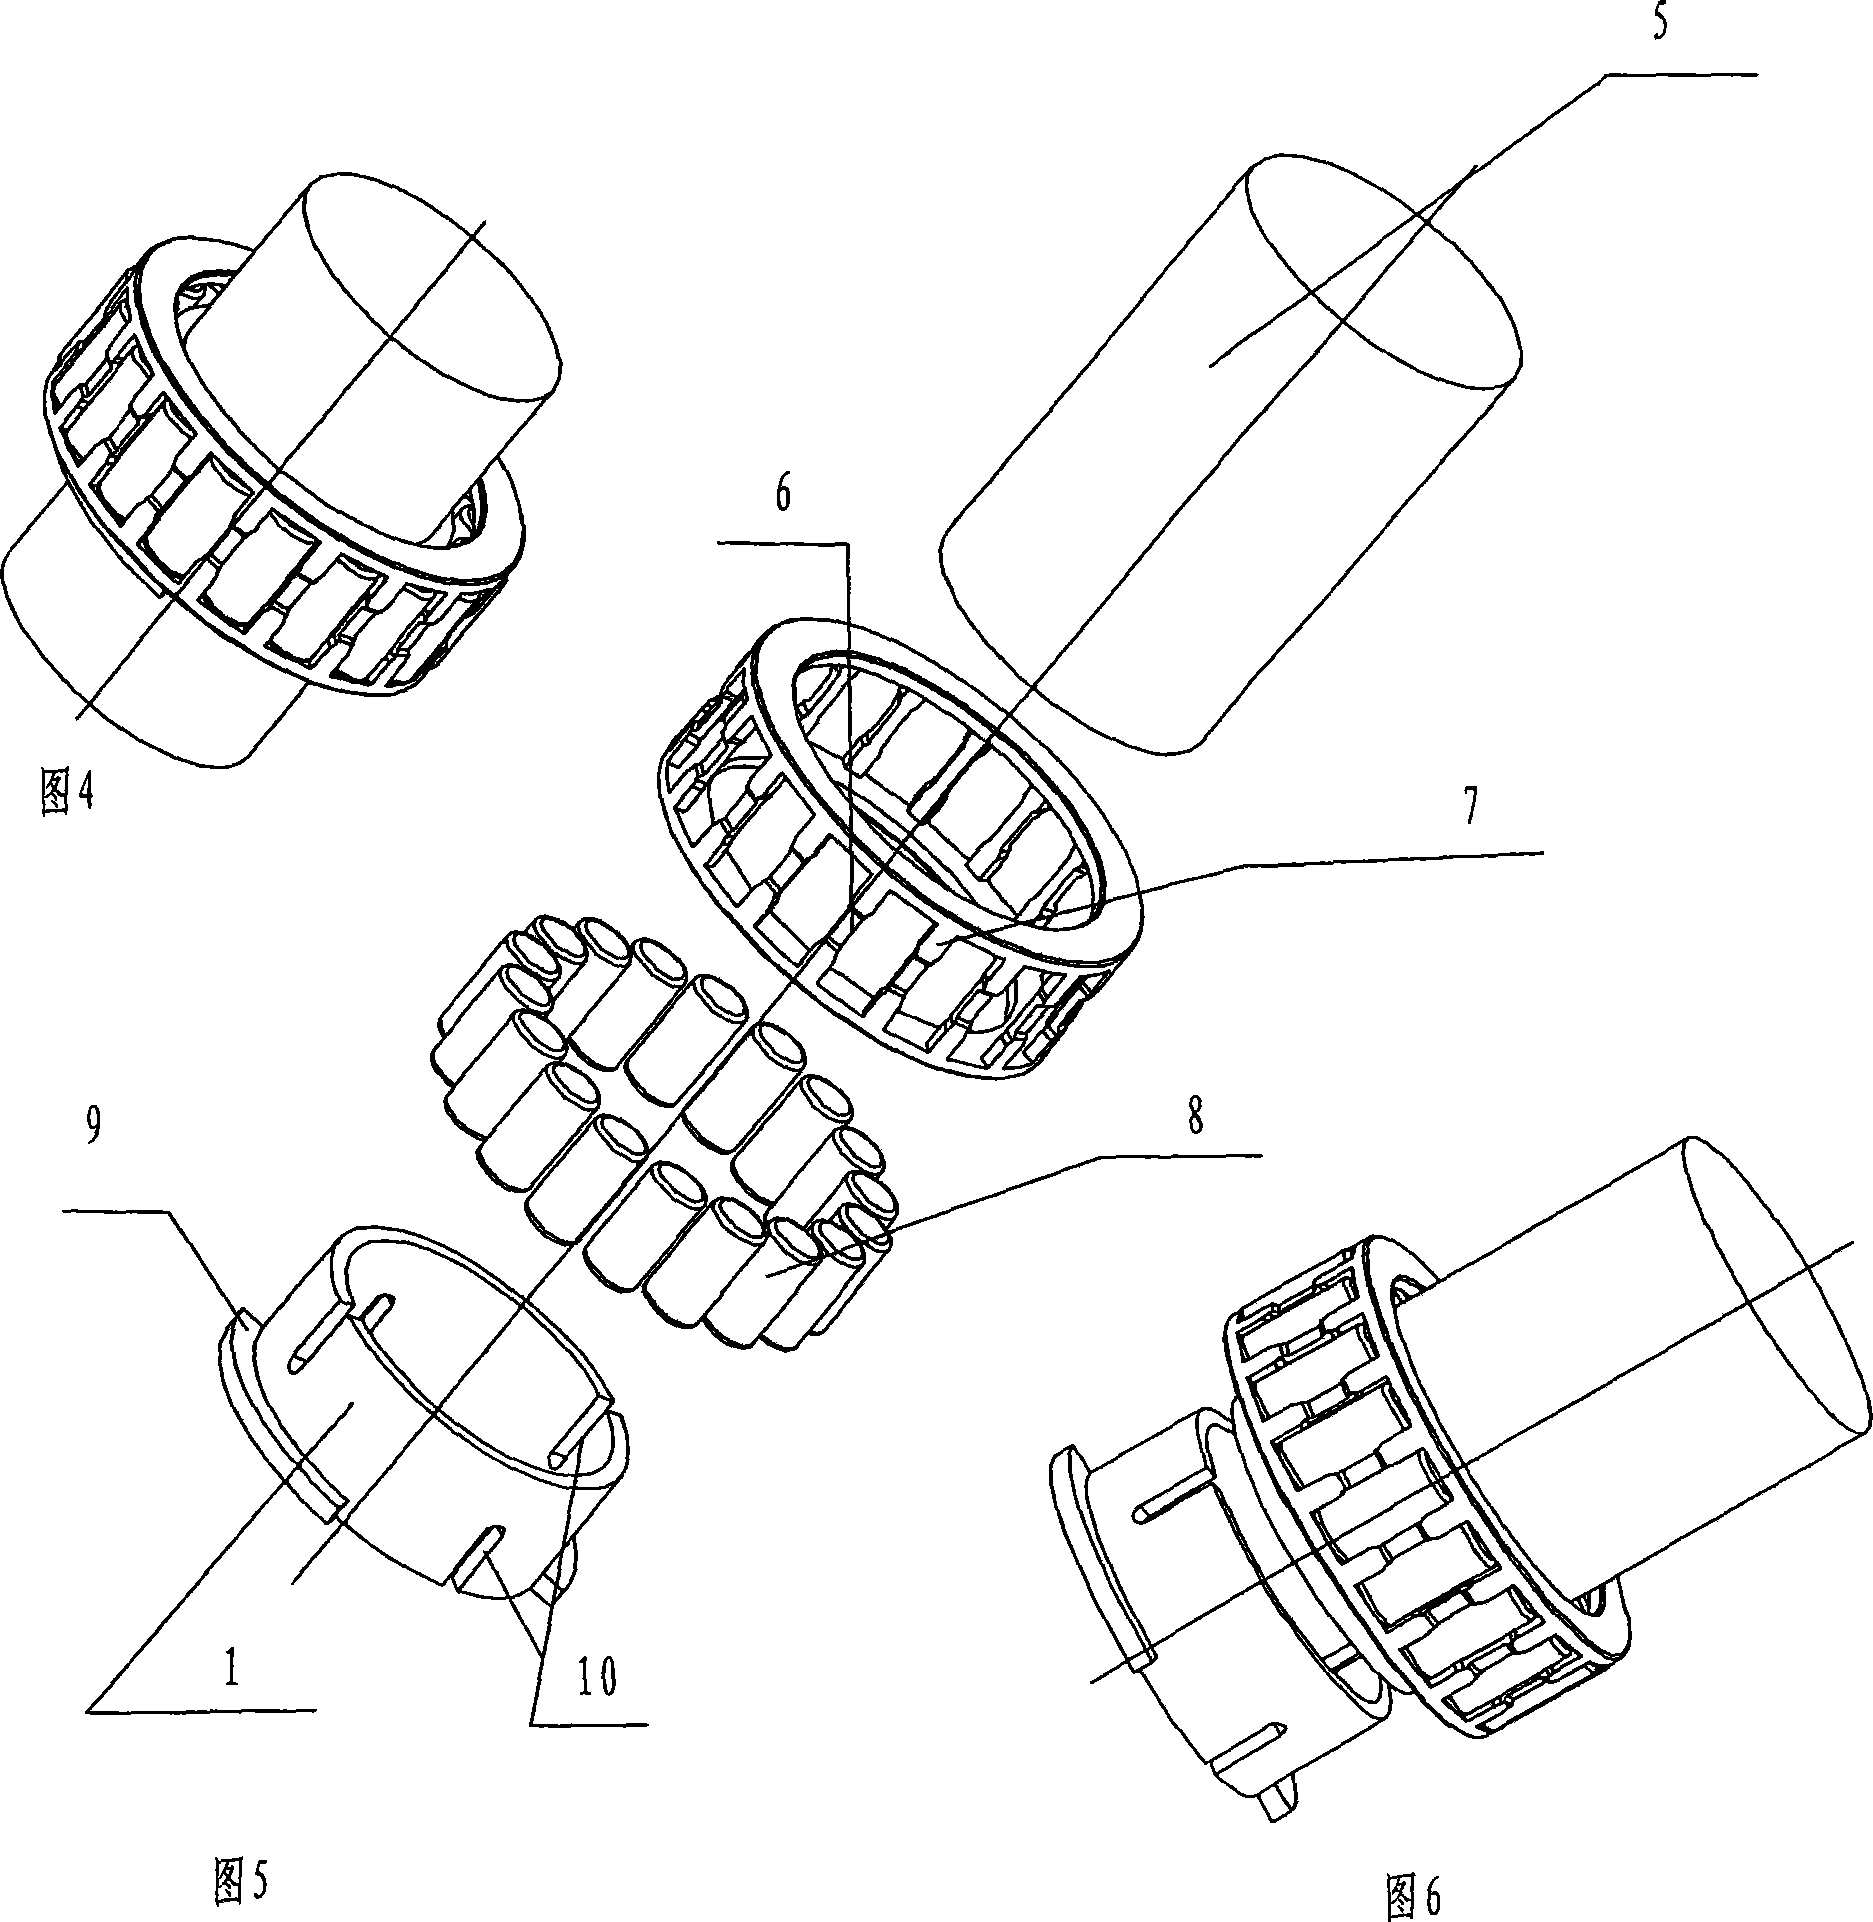 Roller bearing constituted only by holding bracket and roller